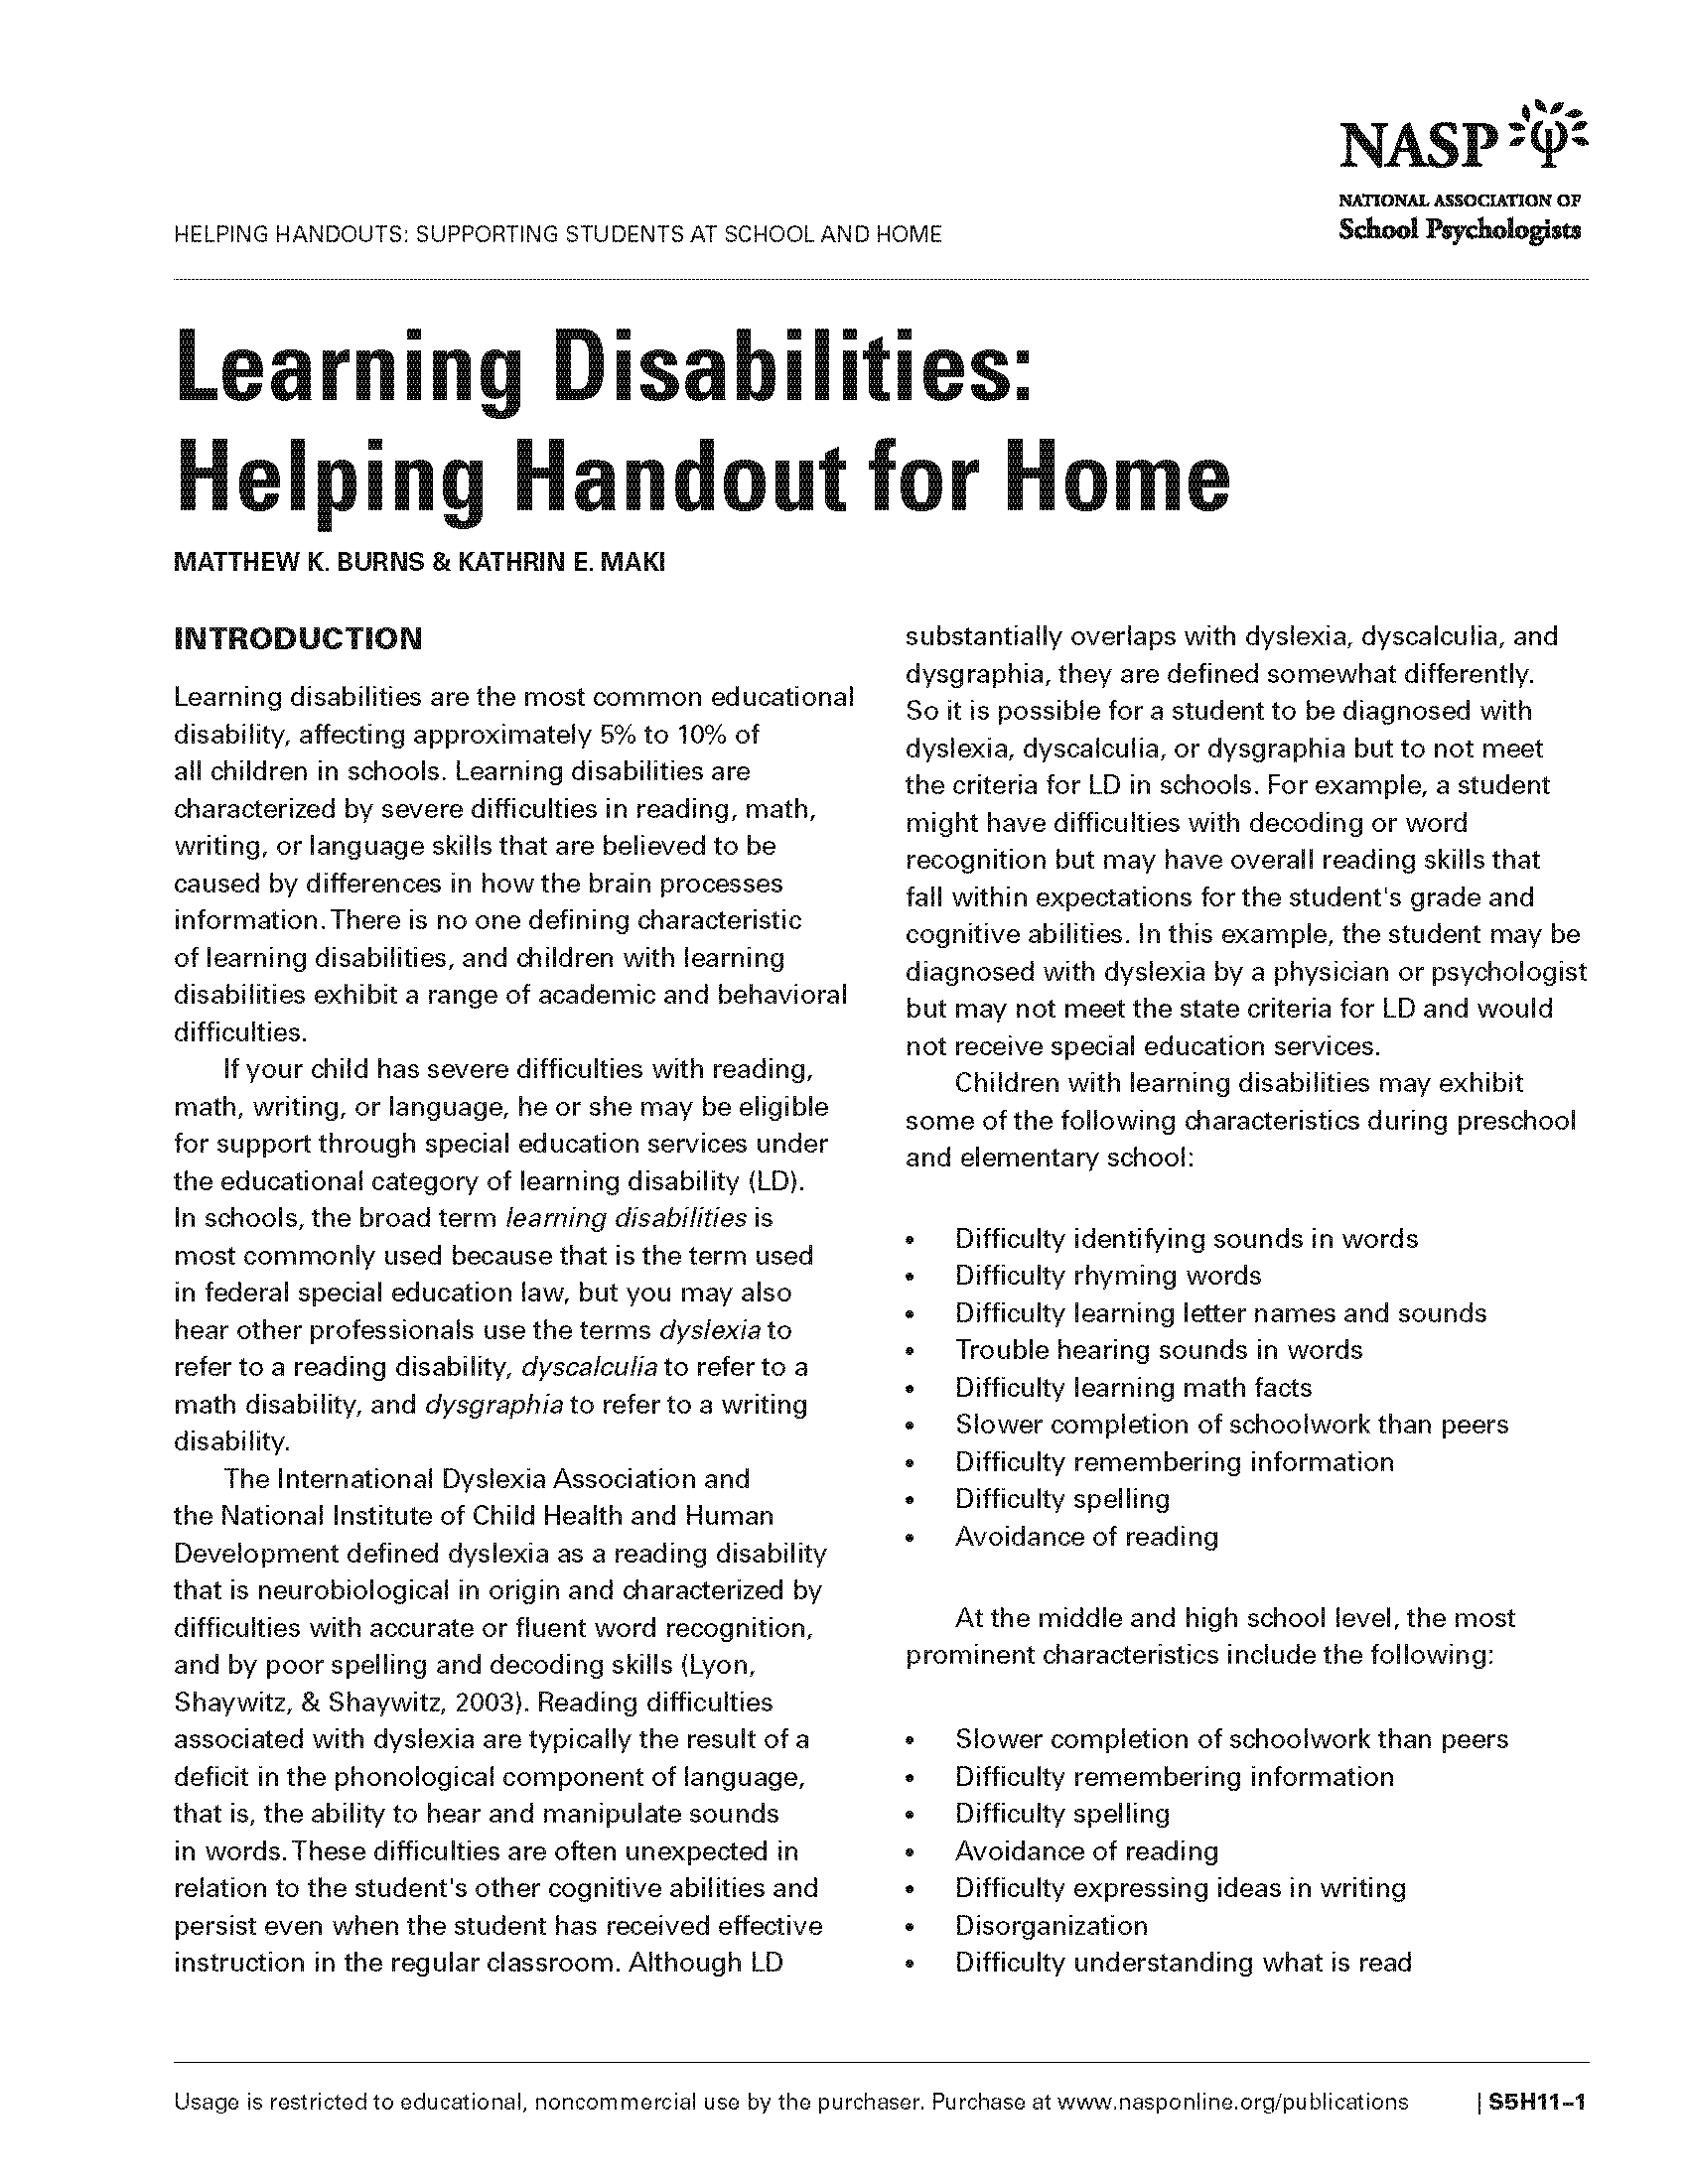 Specific Learning Disabilities: Helping Handout for Home